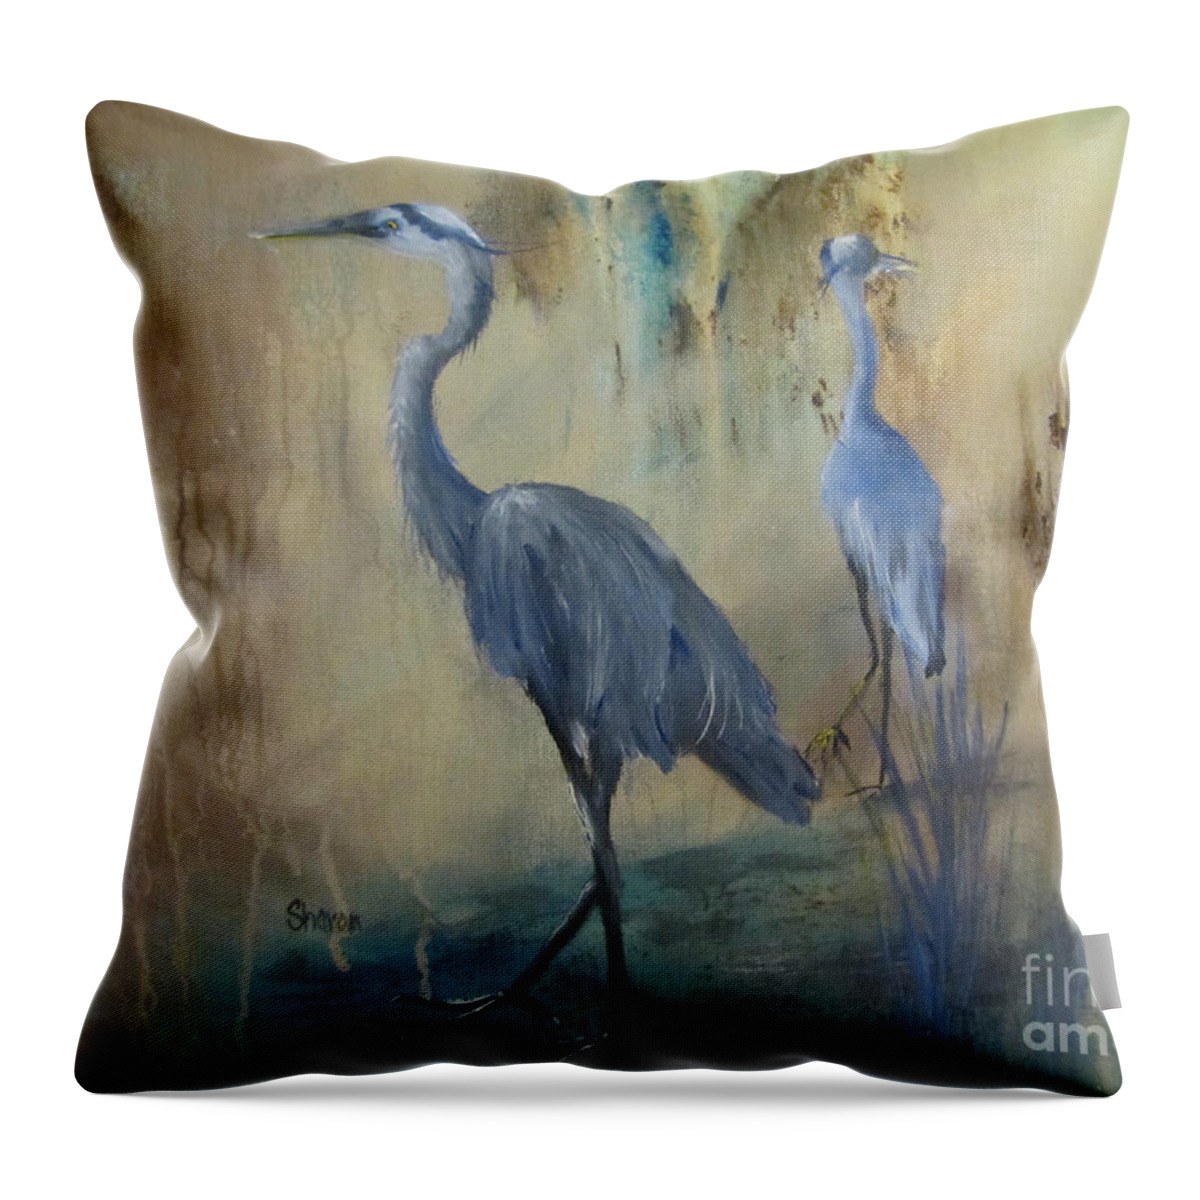 Heron Throw Pillow featuring the painting Morning light by Sharon Burger